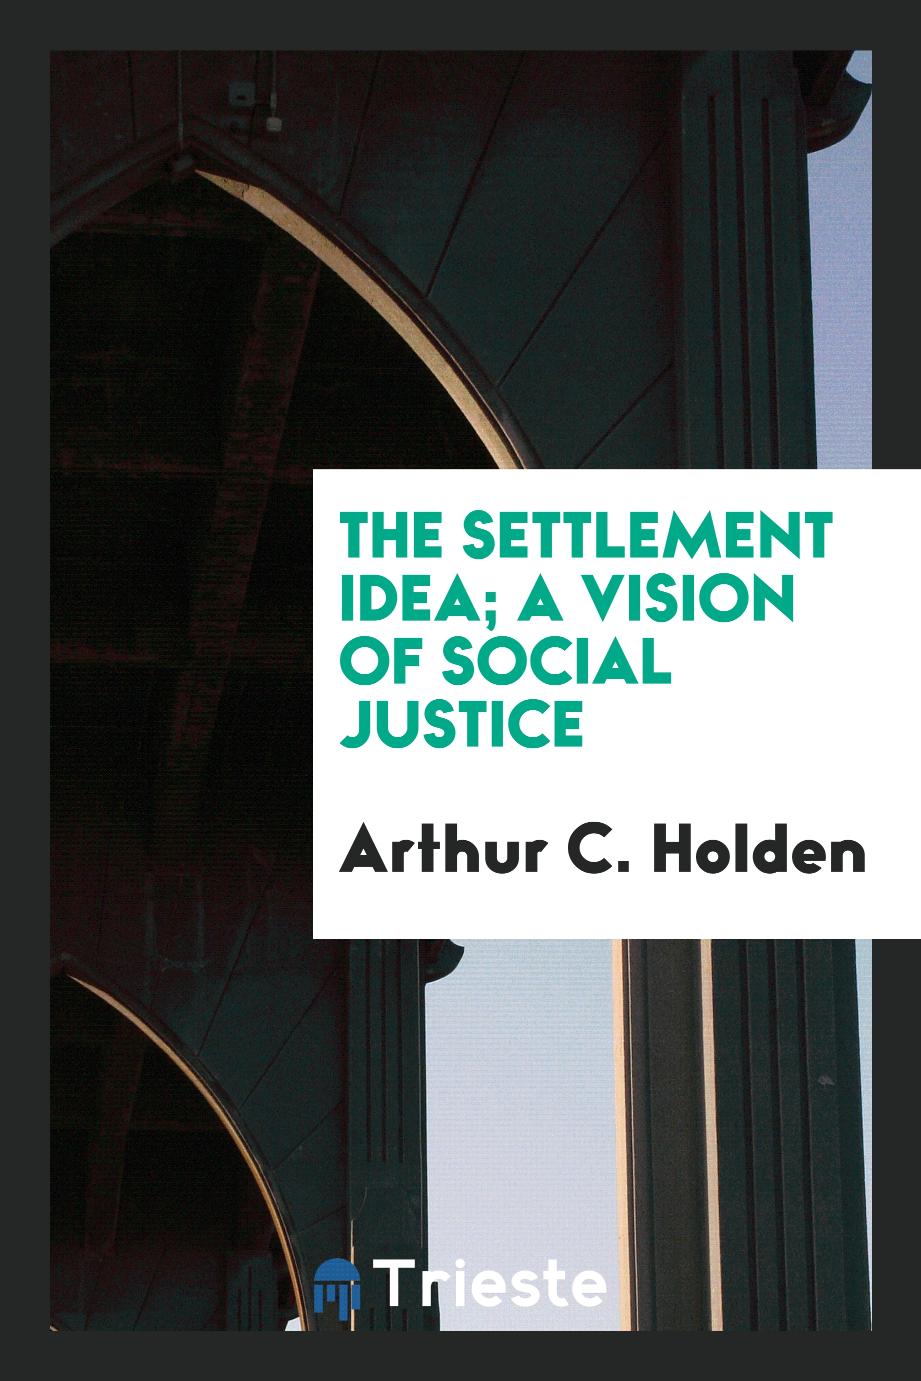 The settlement idea; a vision of social justice